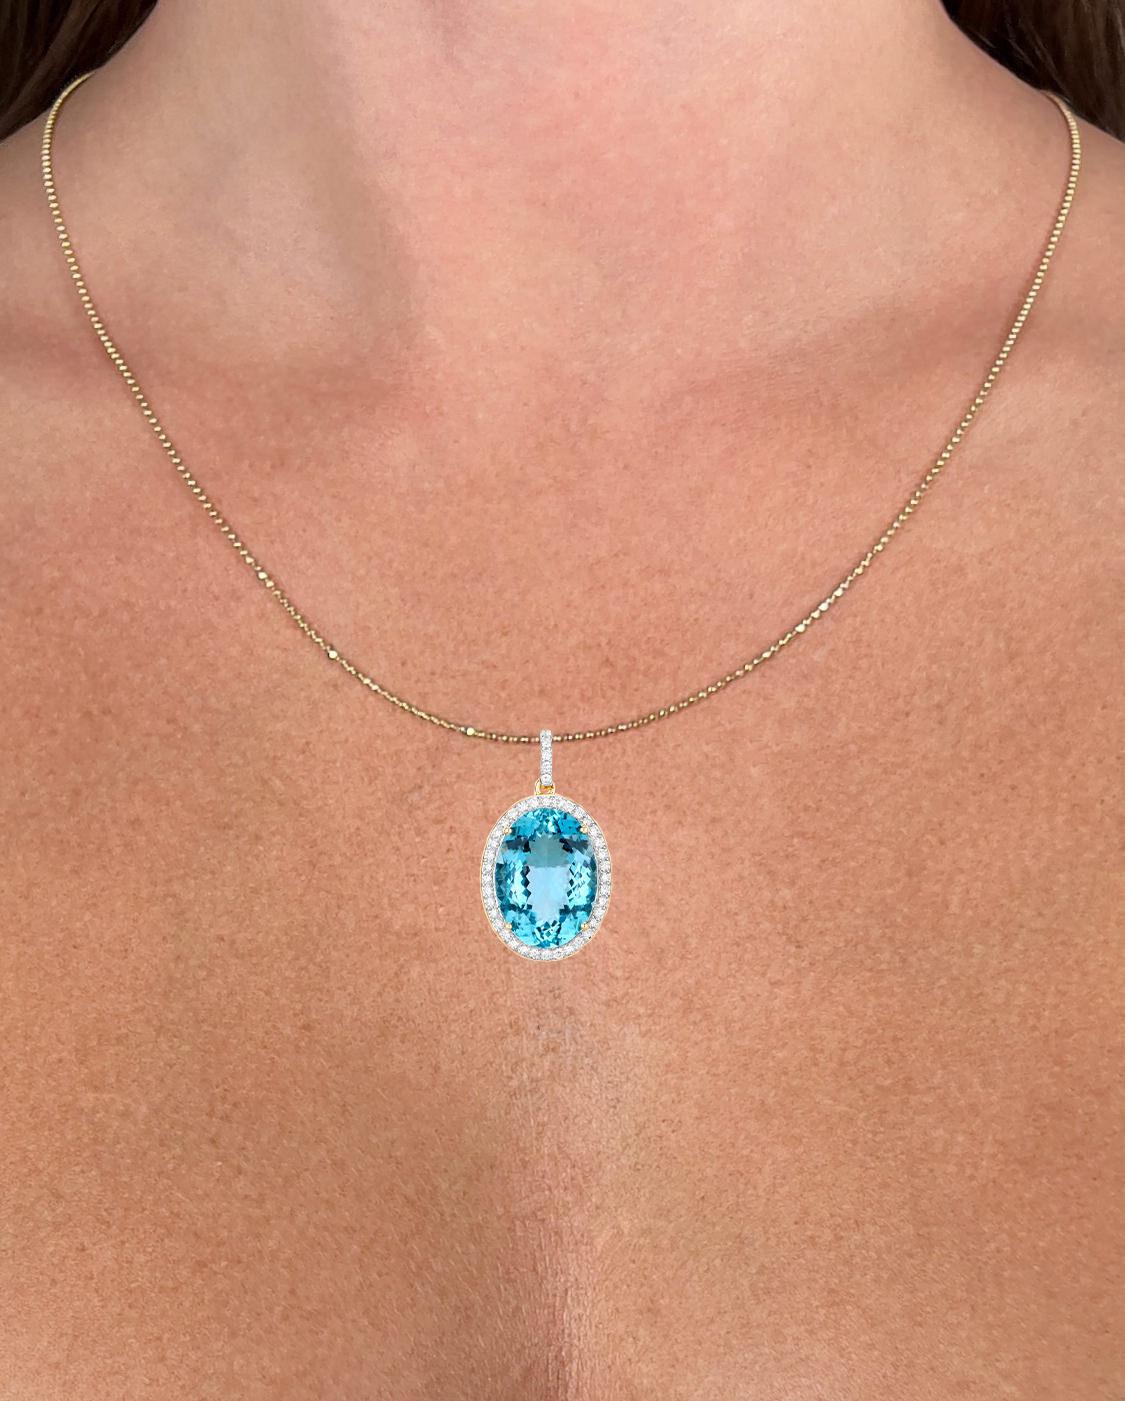 Contemporary Important Aquamarine Pendant Necklace With Diamonds 13.62 Carats 14K Gold For Sale